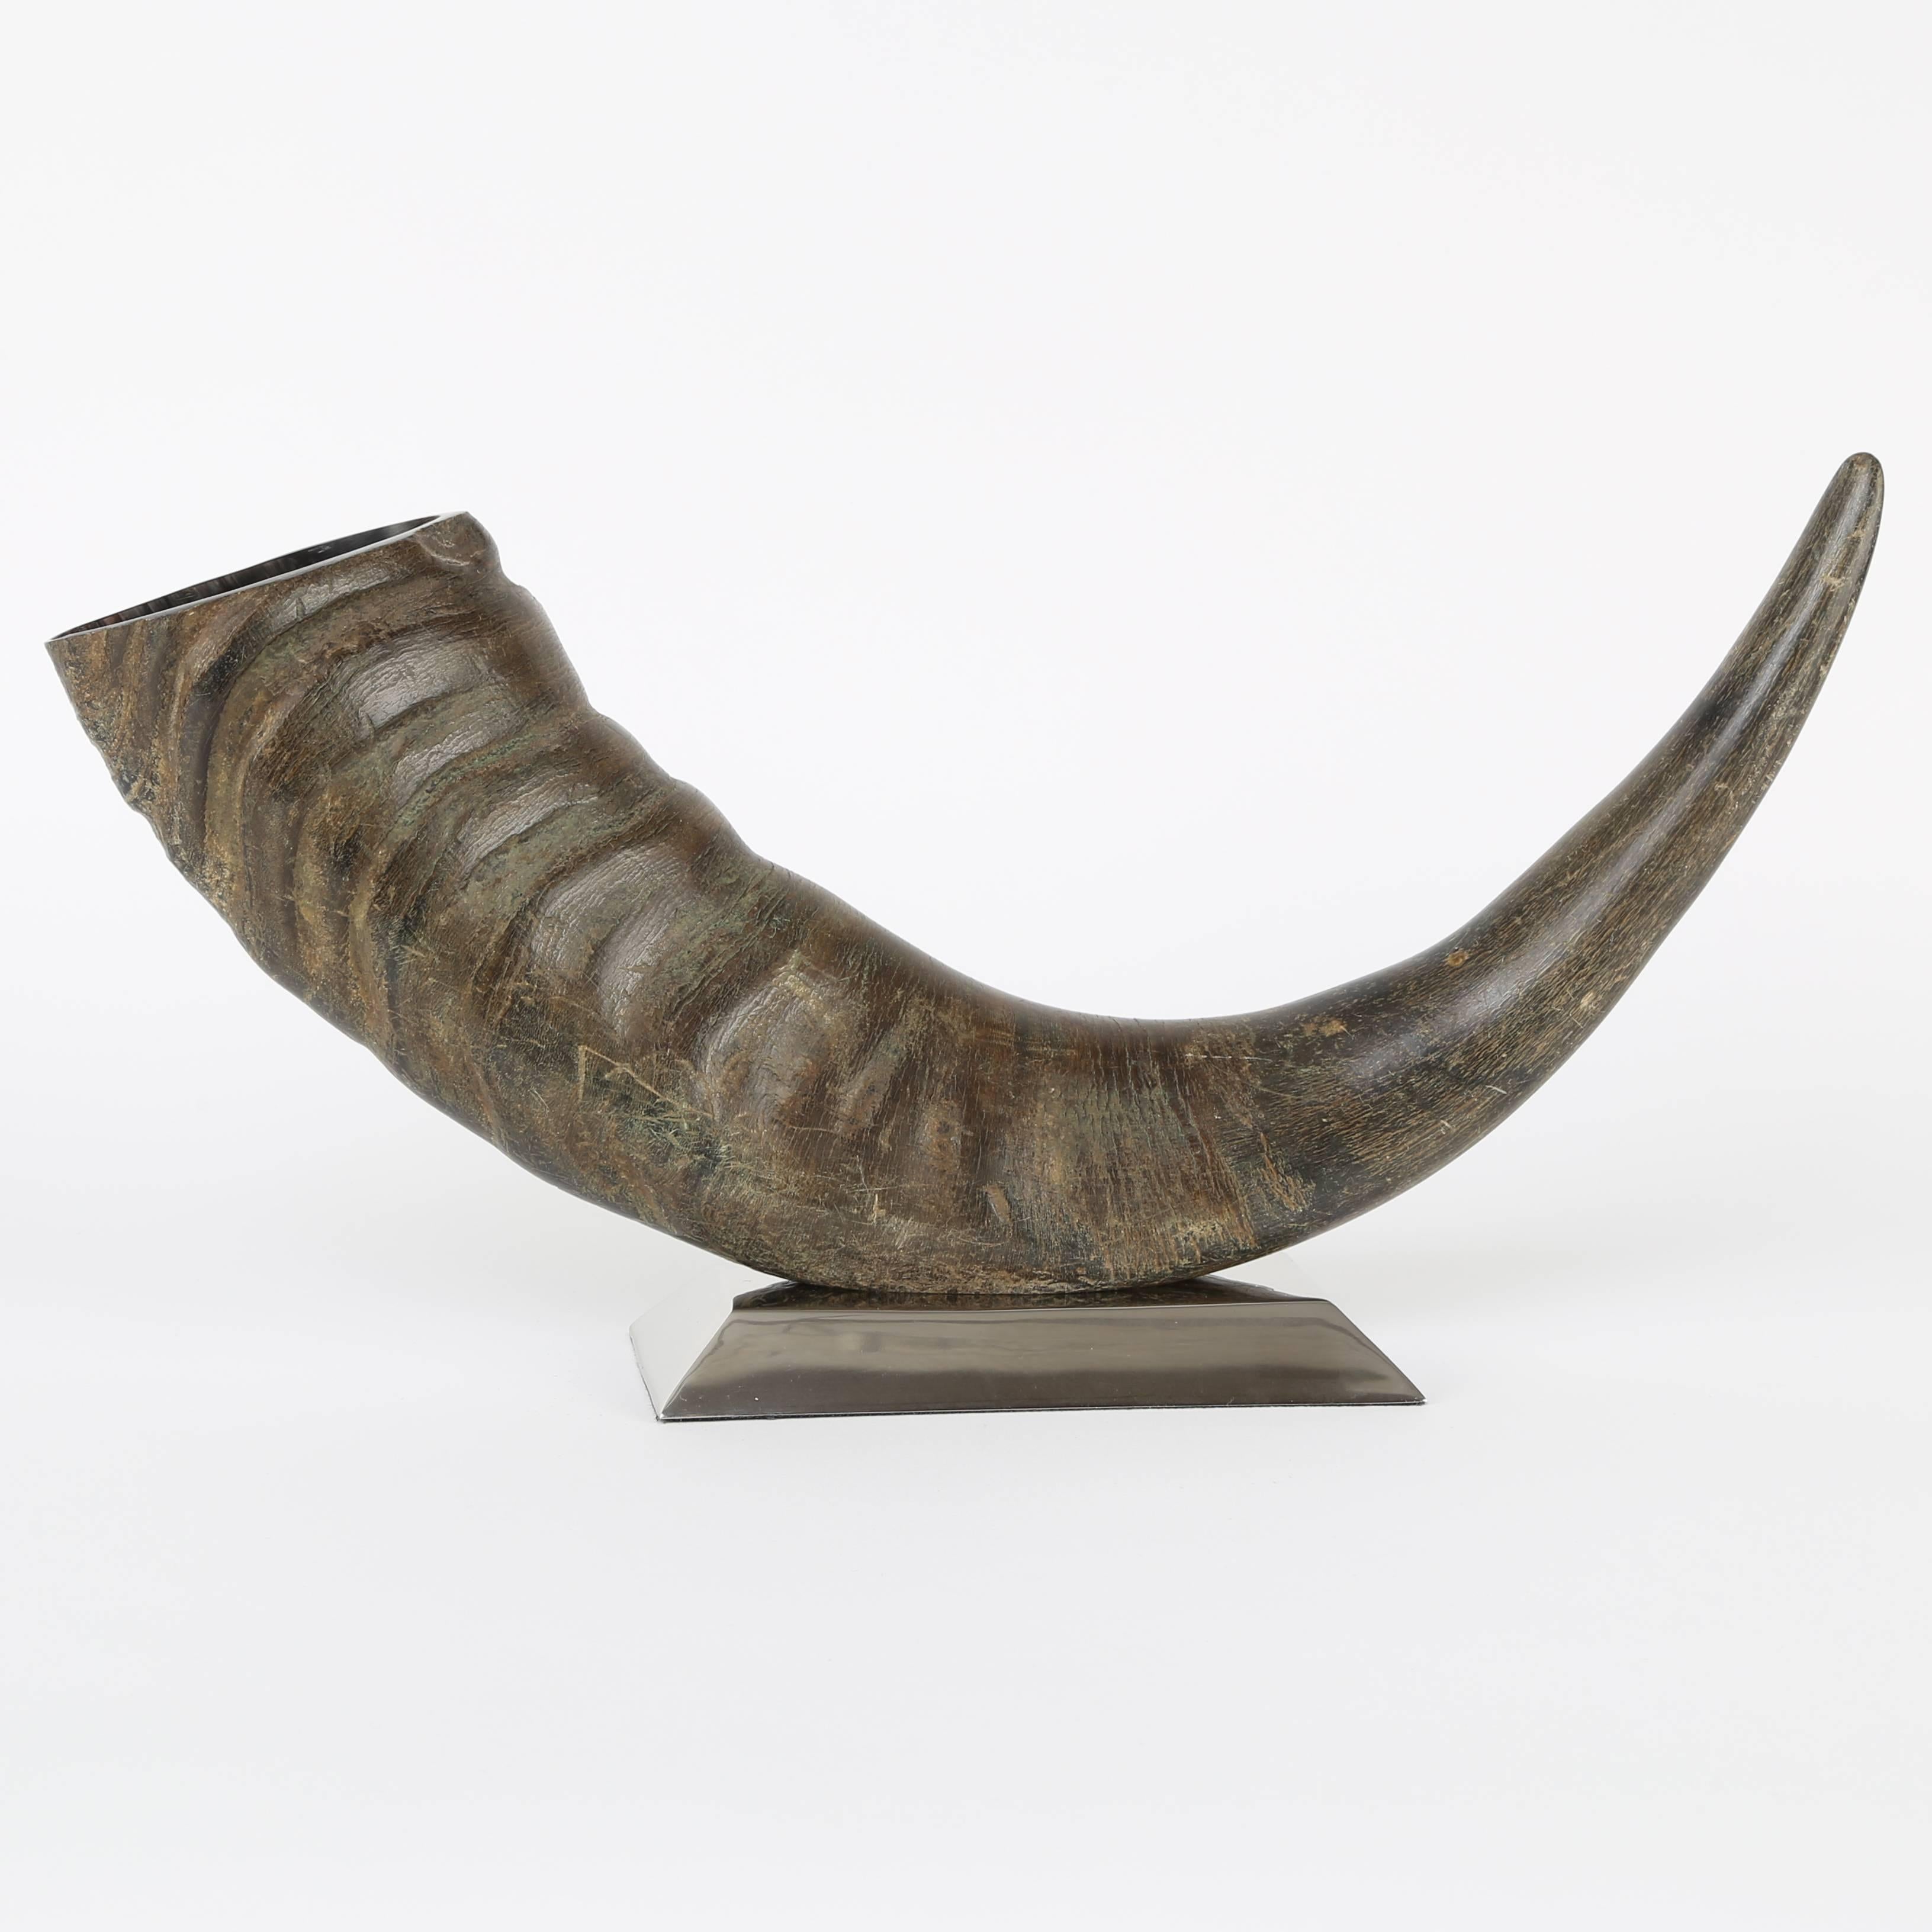 Decorative water buffalo horn mounted on a rectangular, tapered, slightly curved polished stainless steel base. We believe this is a domesticated swamp water buffalo from Southeast Asia, not a wild or endangered species. A great organic accent